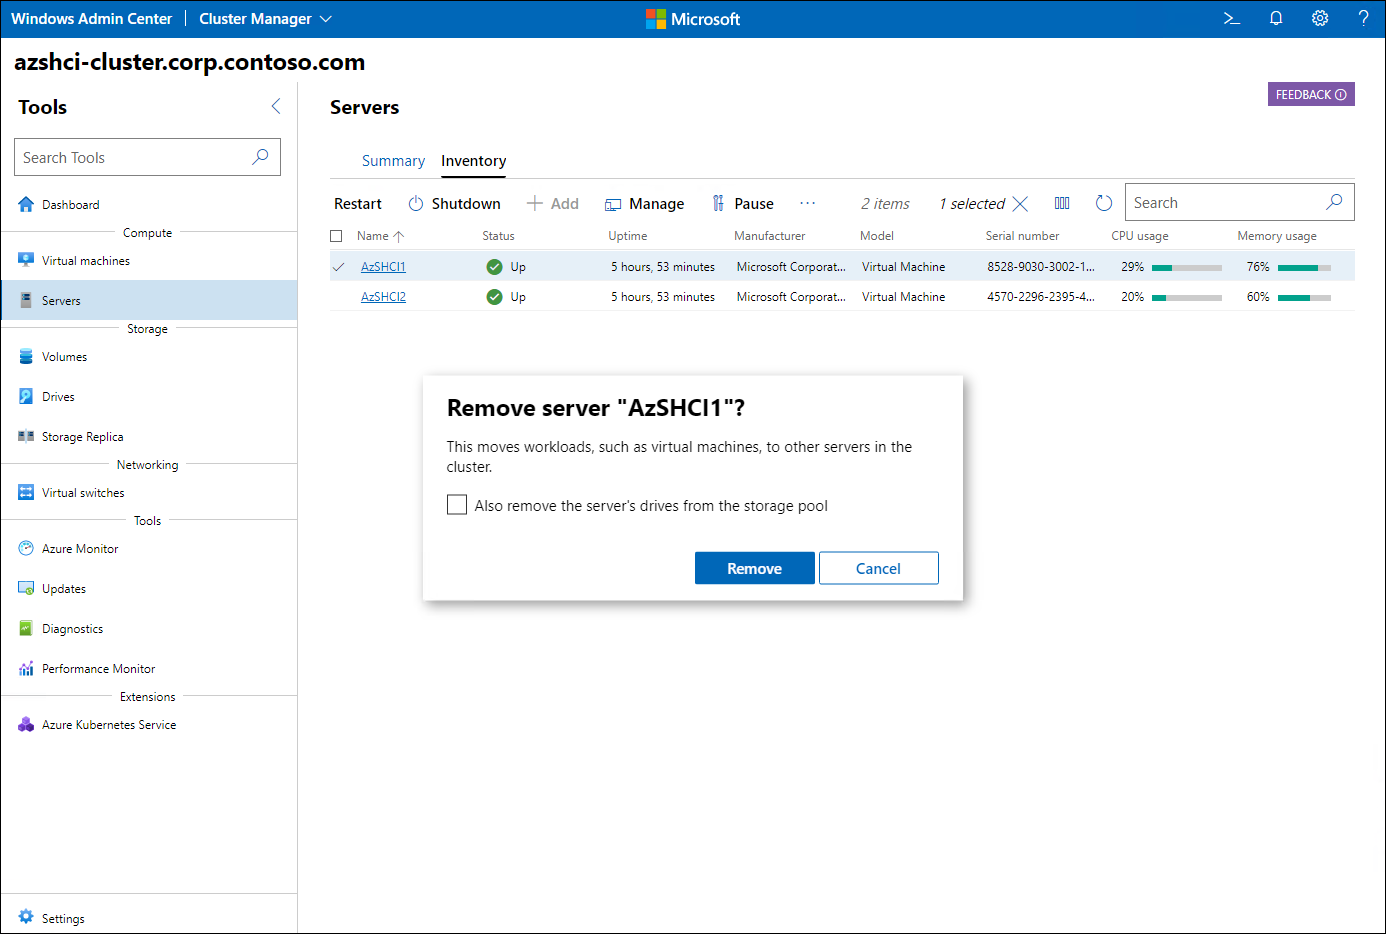 The screenshot depicts the Cluster Manager interface of Windows Admin Center displaying the remove server confirmation prompt.